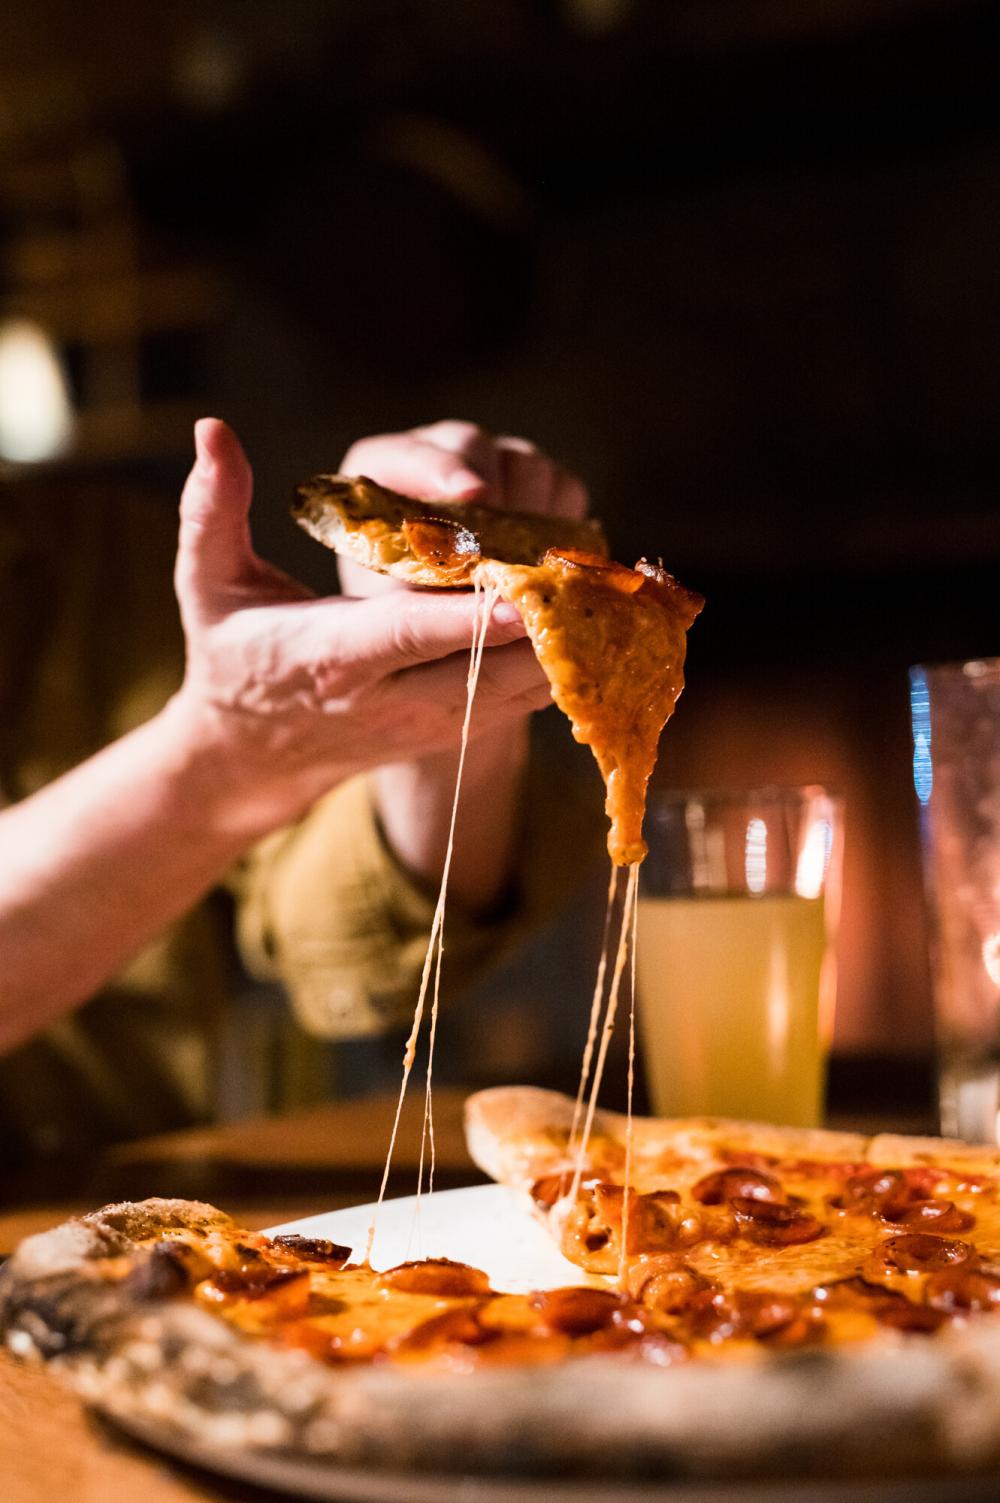 A man's hand holds a slice of wood-fired pizza